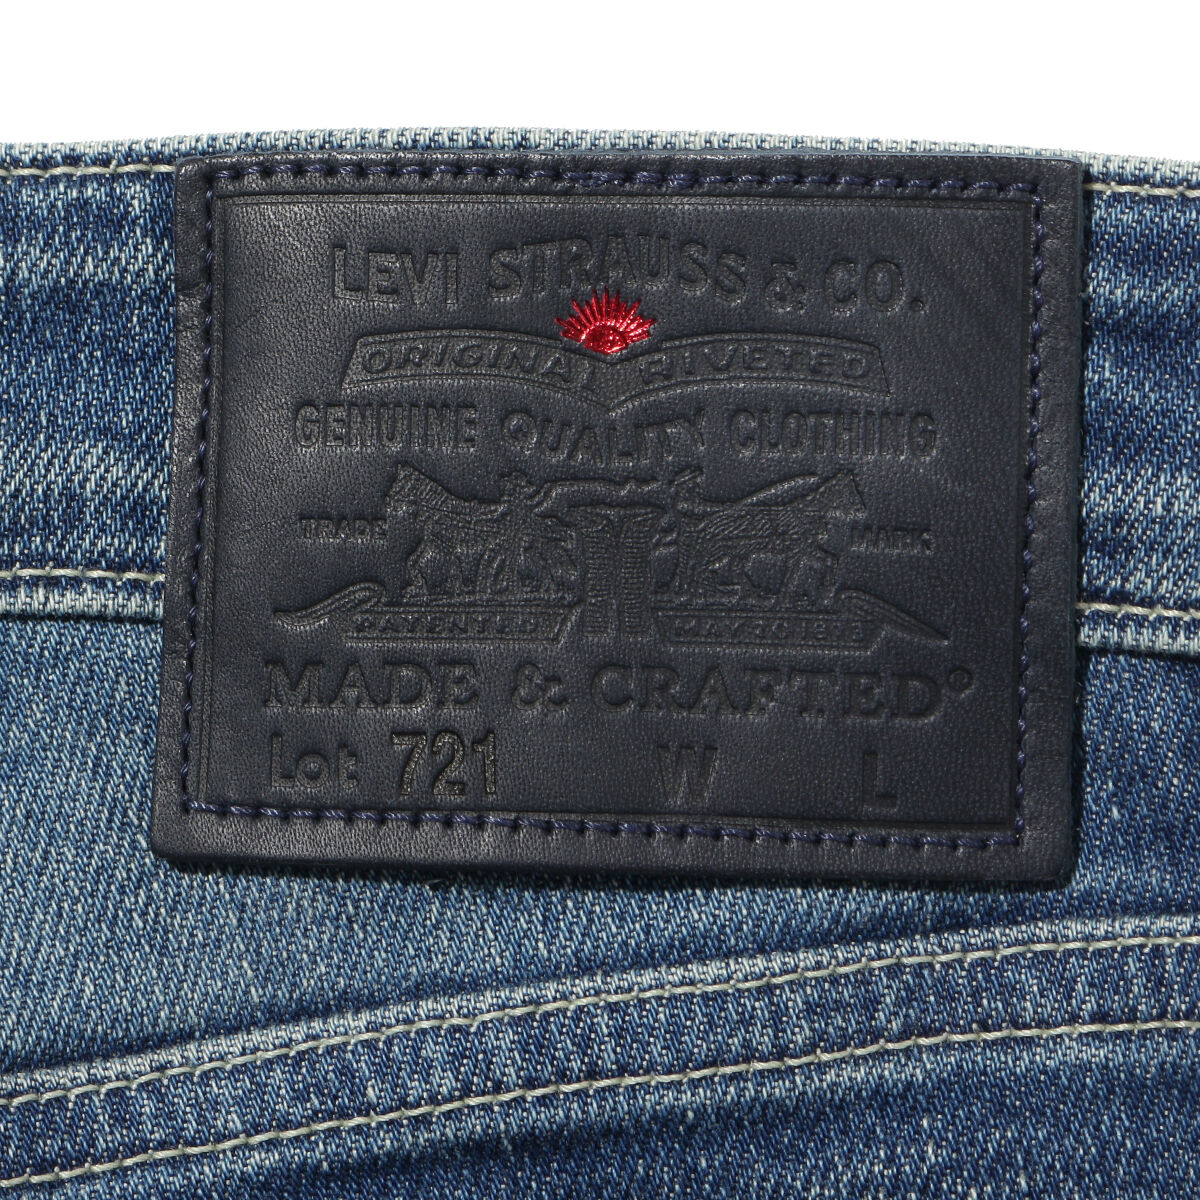 LEVI'S® MADE&CRAFTED®721™ ANKLE SUKI DARK MADE IN JAPAN 